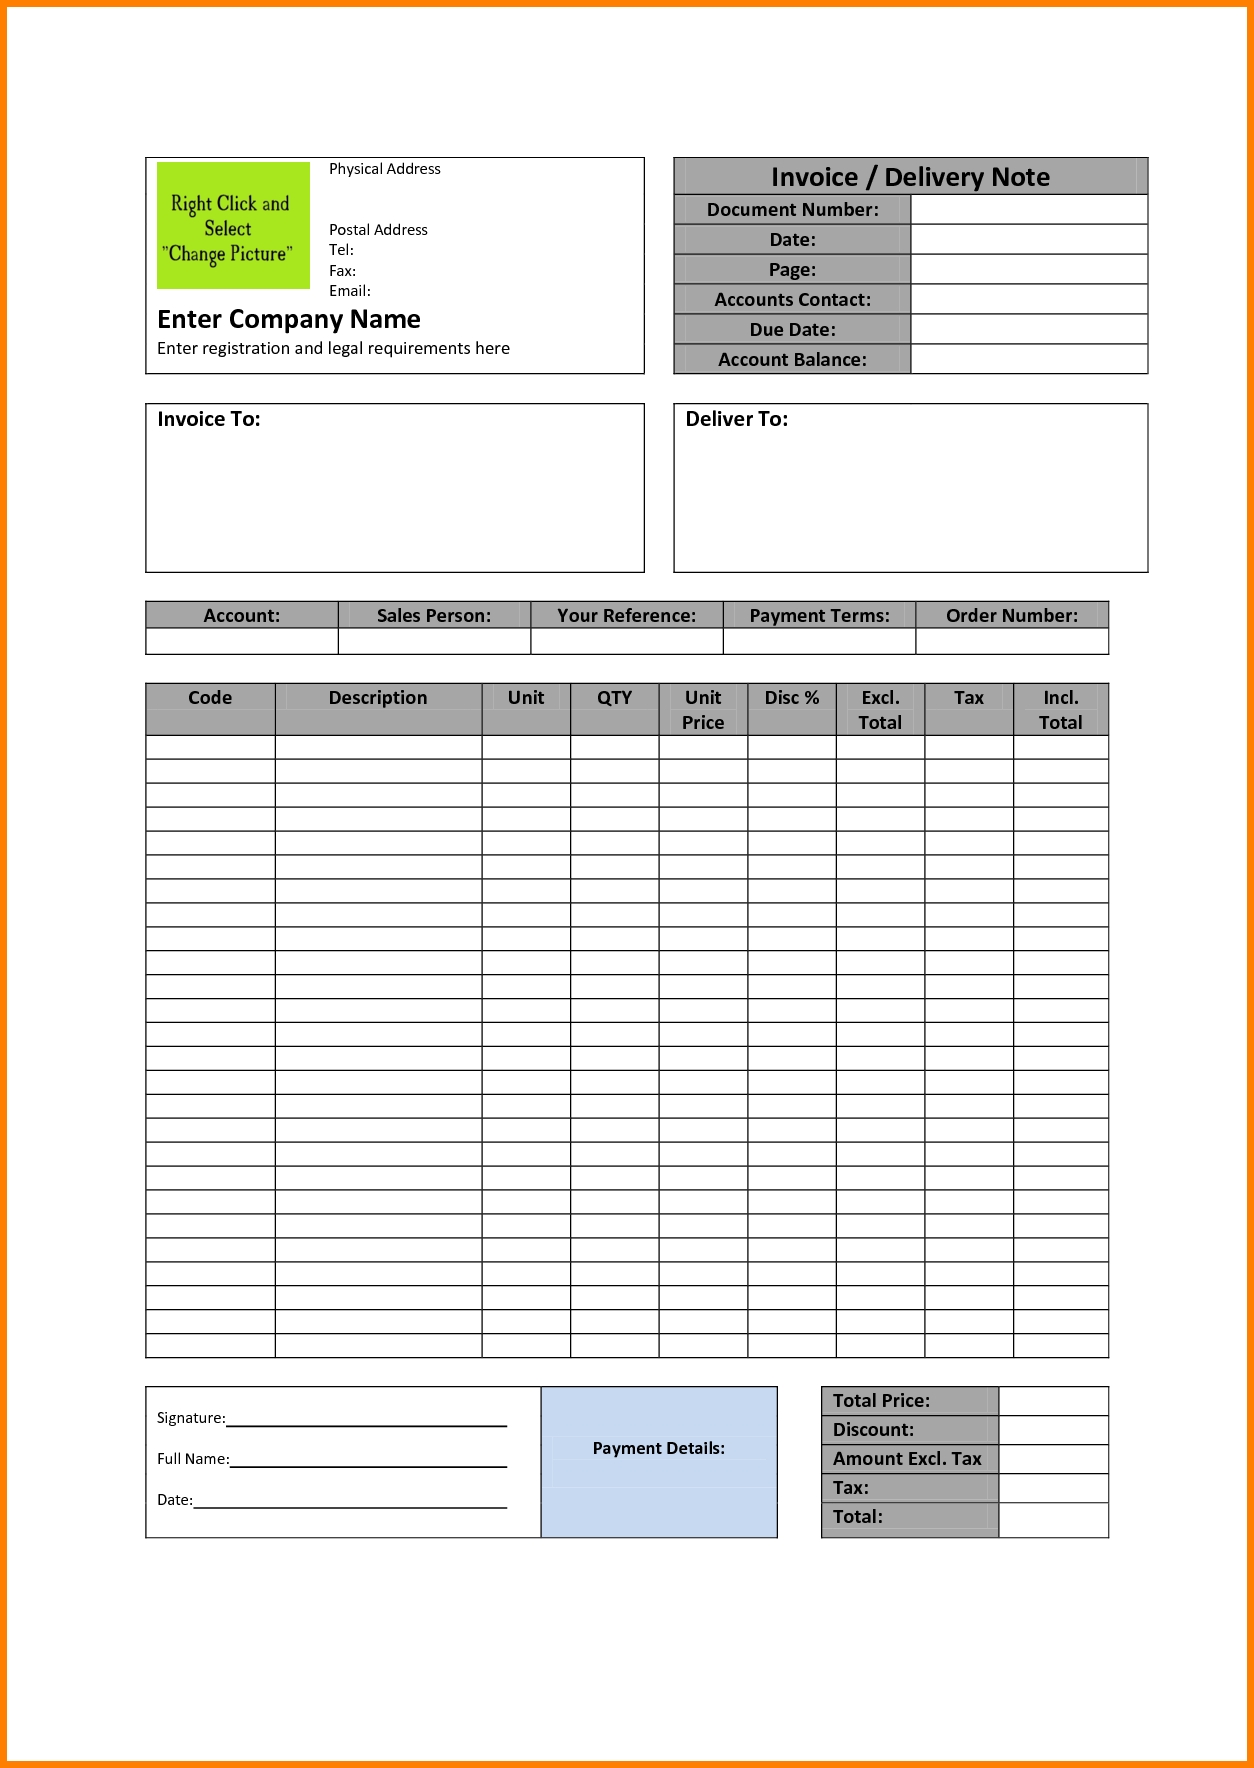 invoice word document 10 tax invoice template word doc debt spreadsheet 1254 X 1768